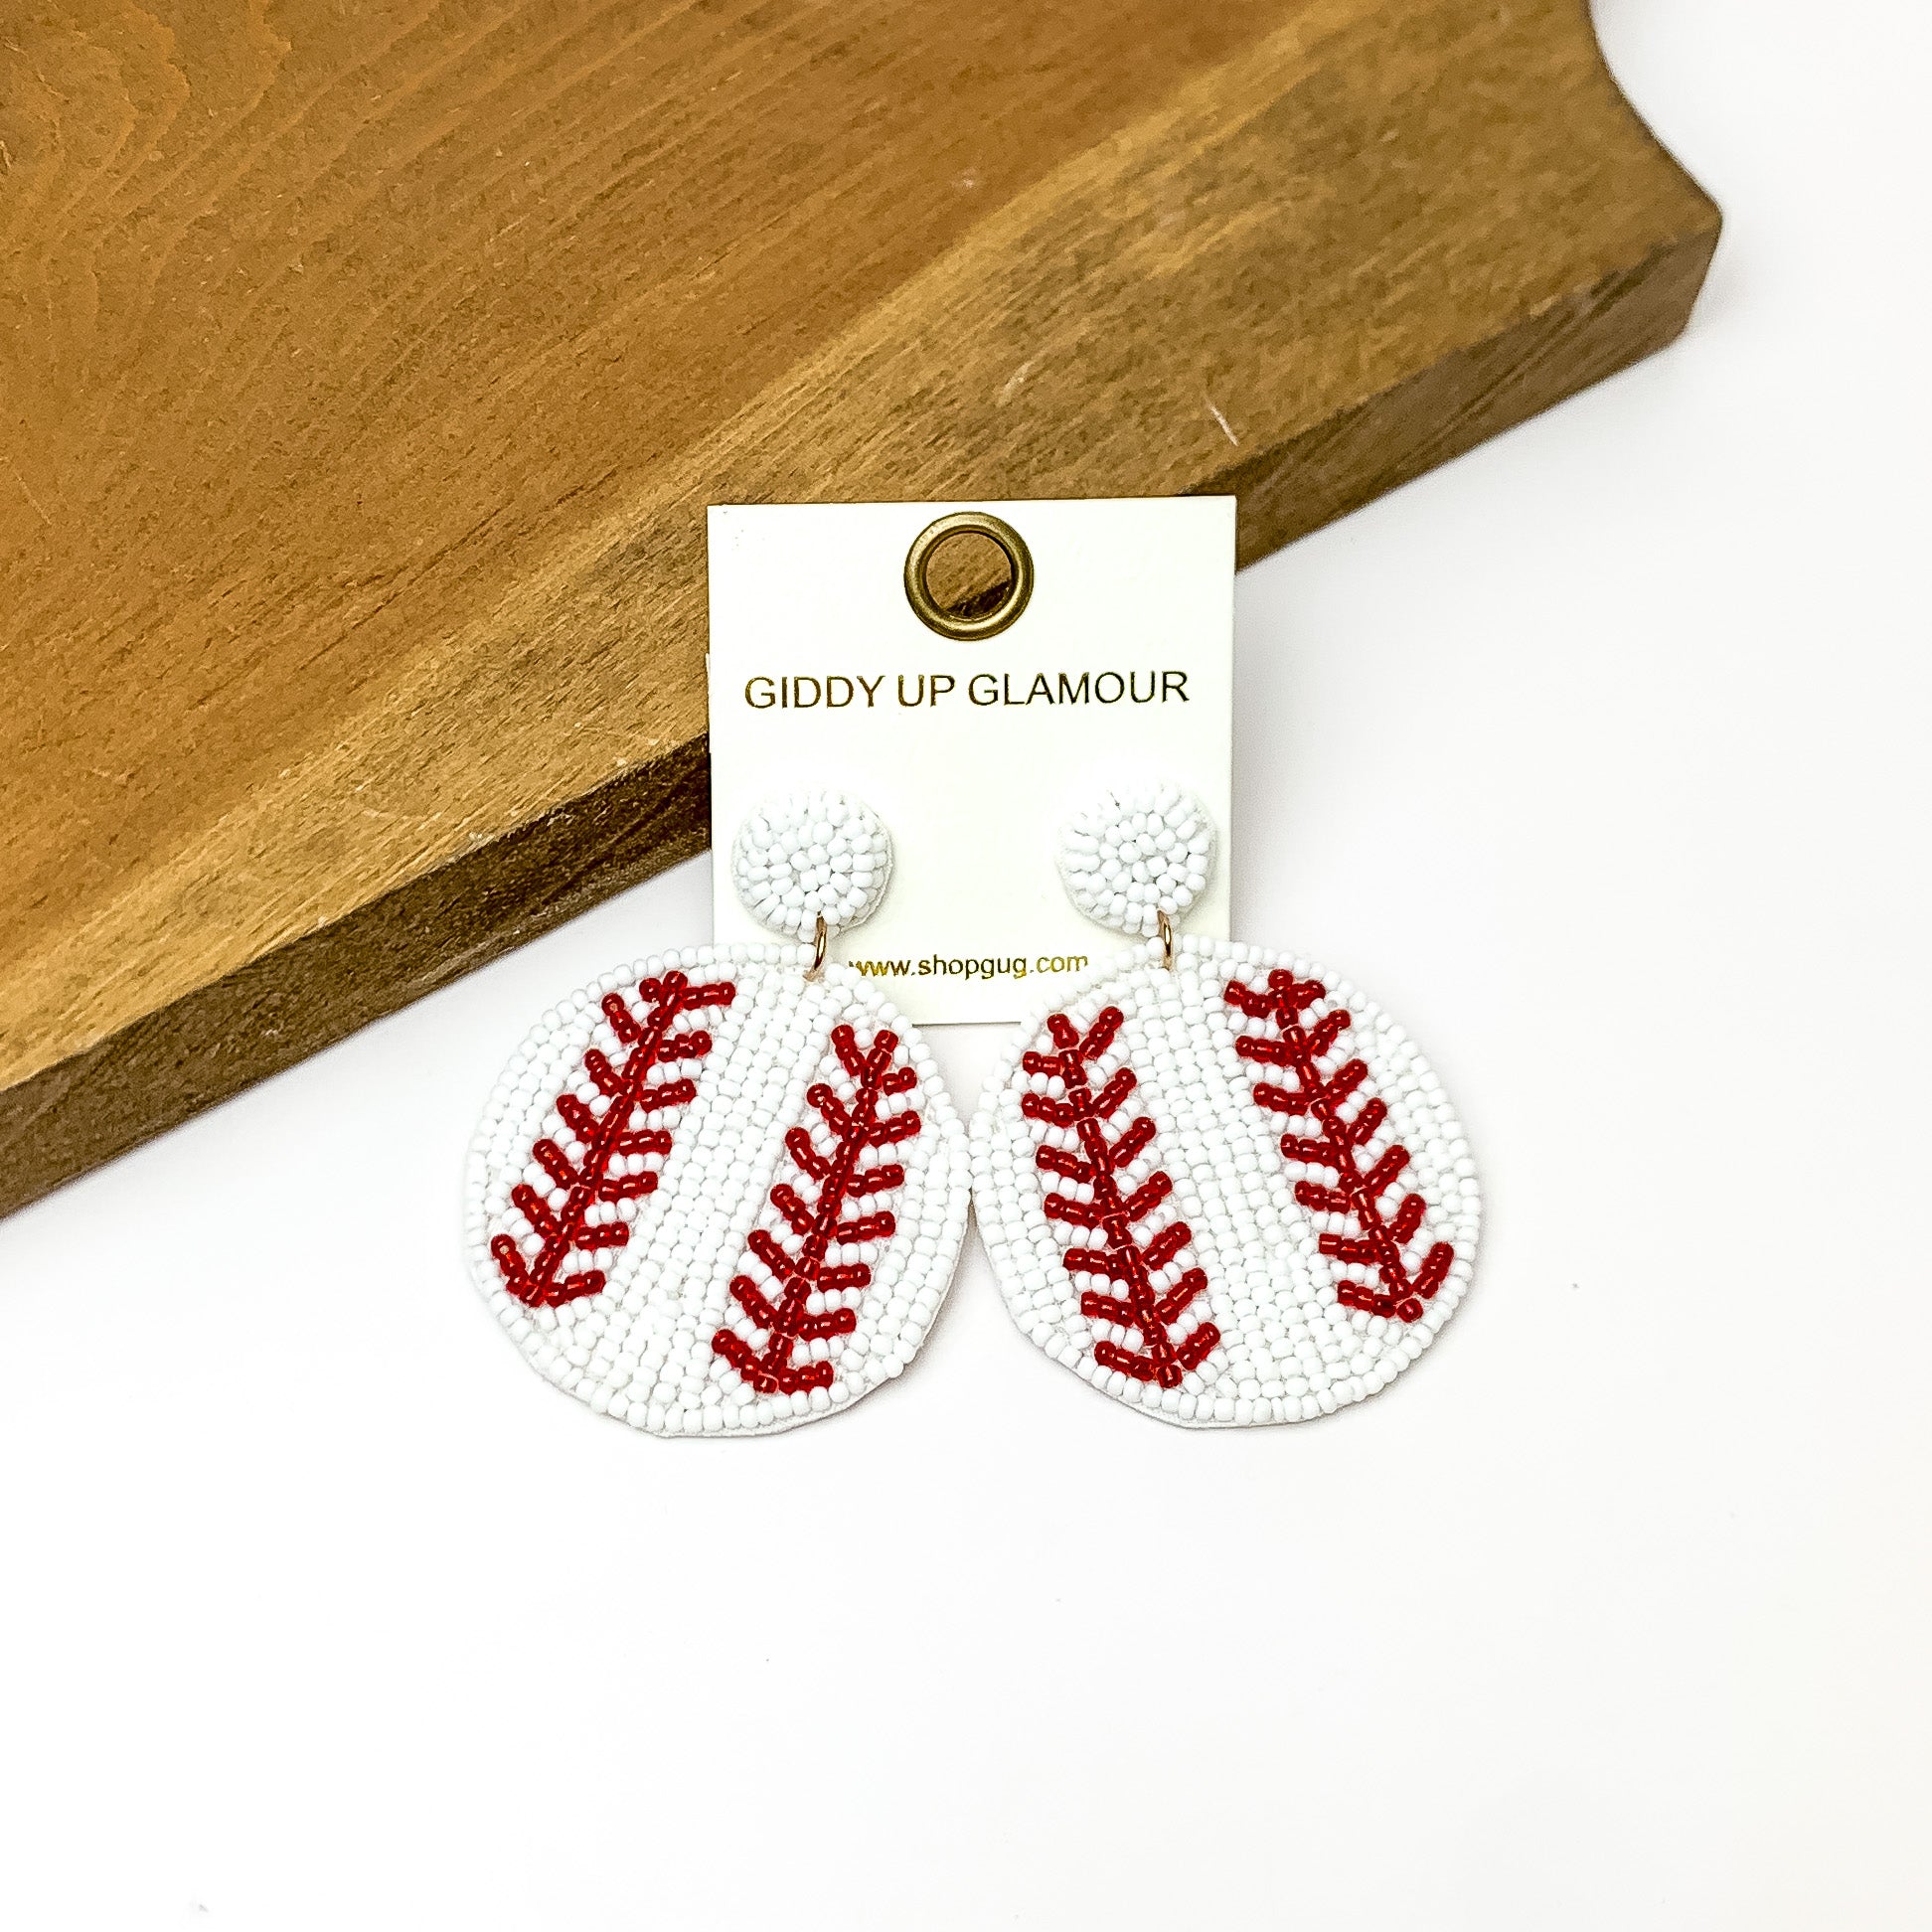 Baseball Circular Beaded Earrings in White and Maroon - Giddy Up Glamour Boutique